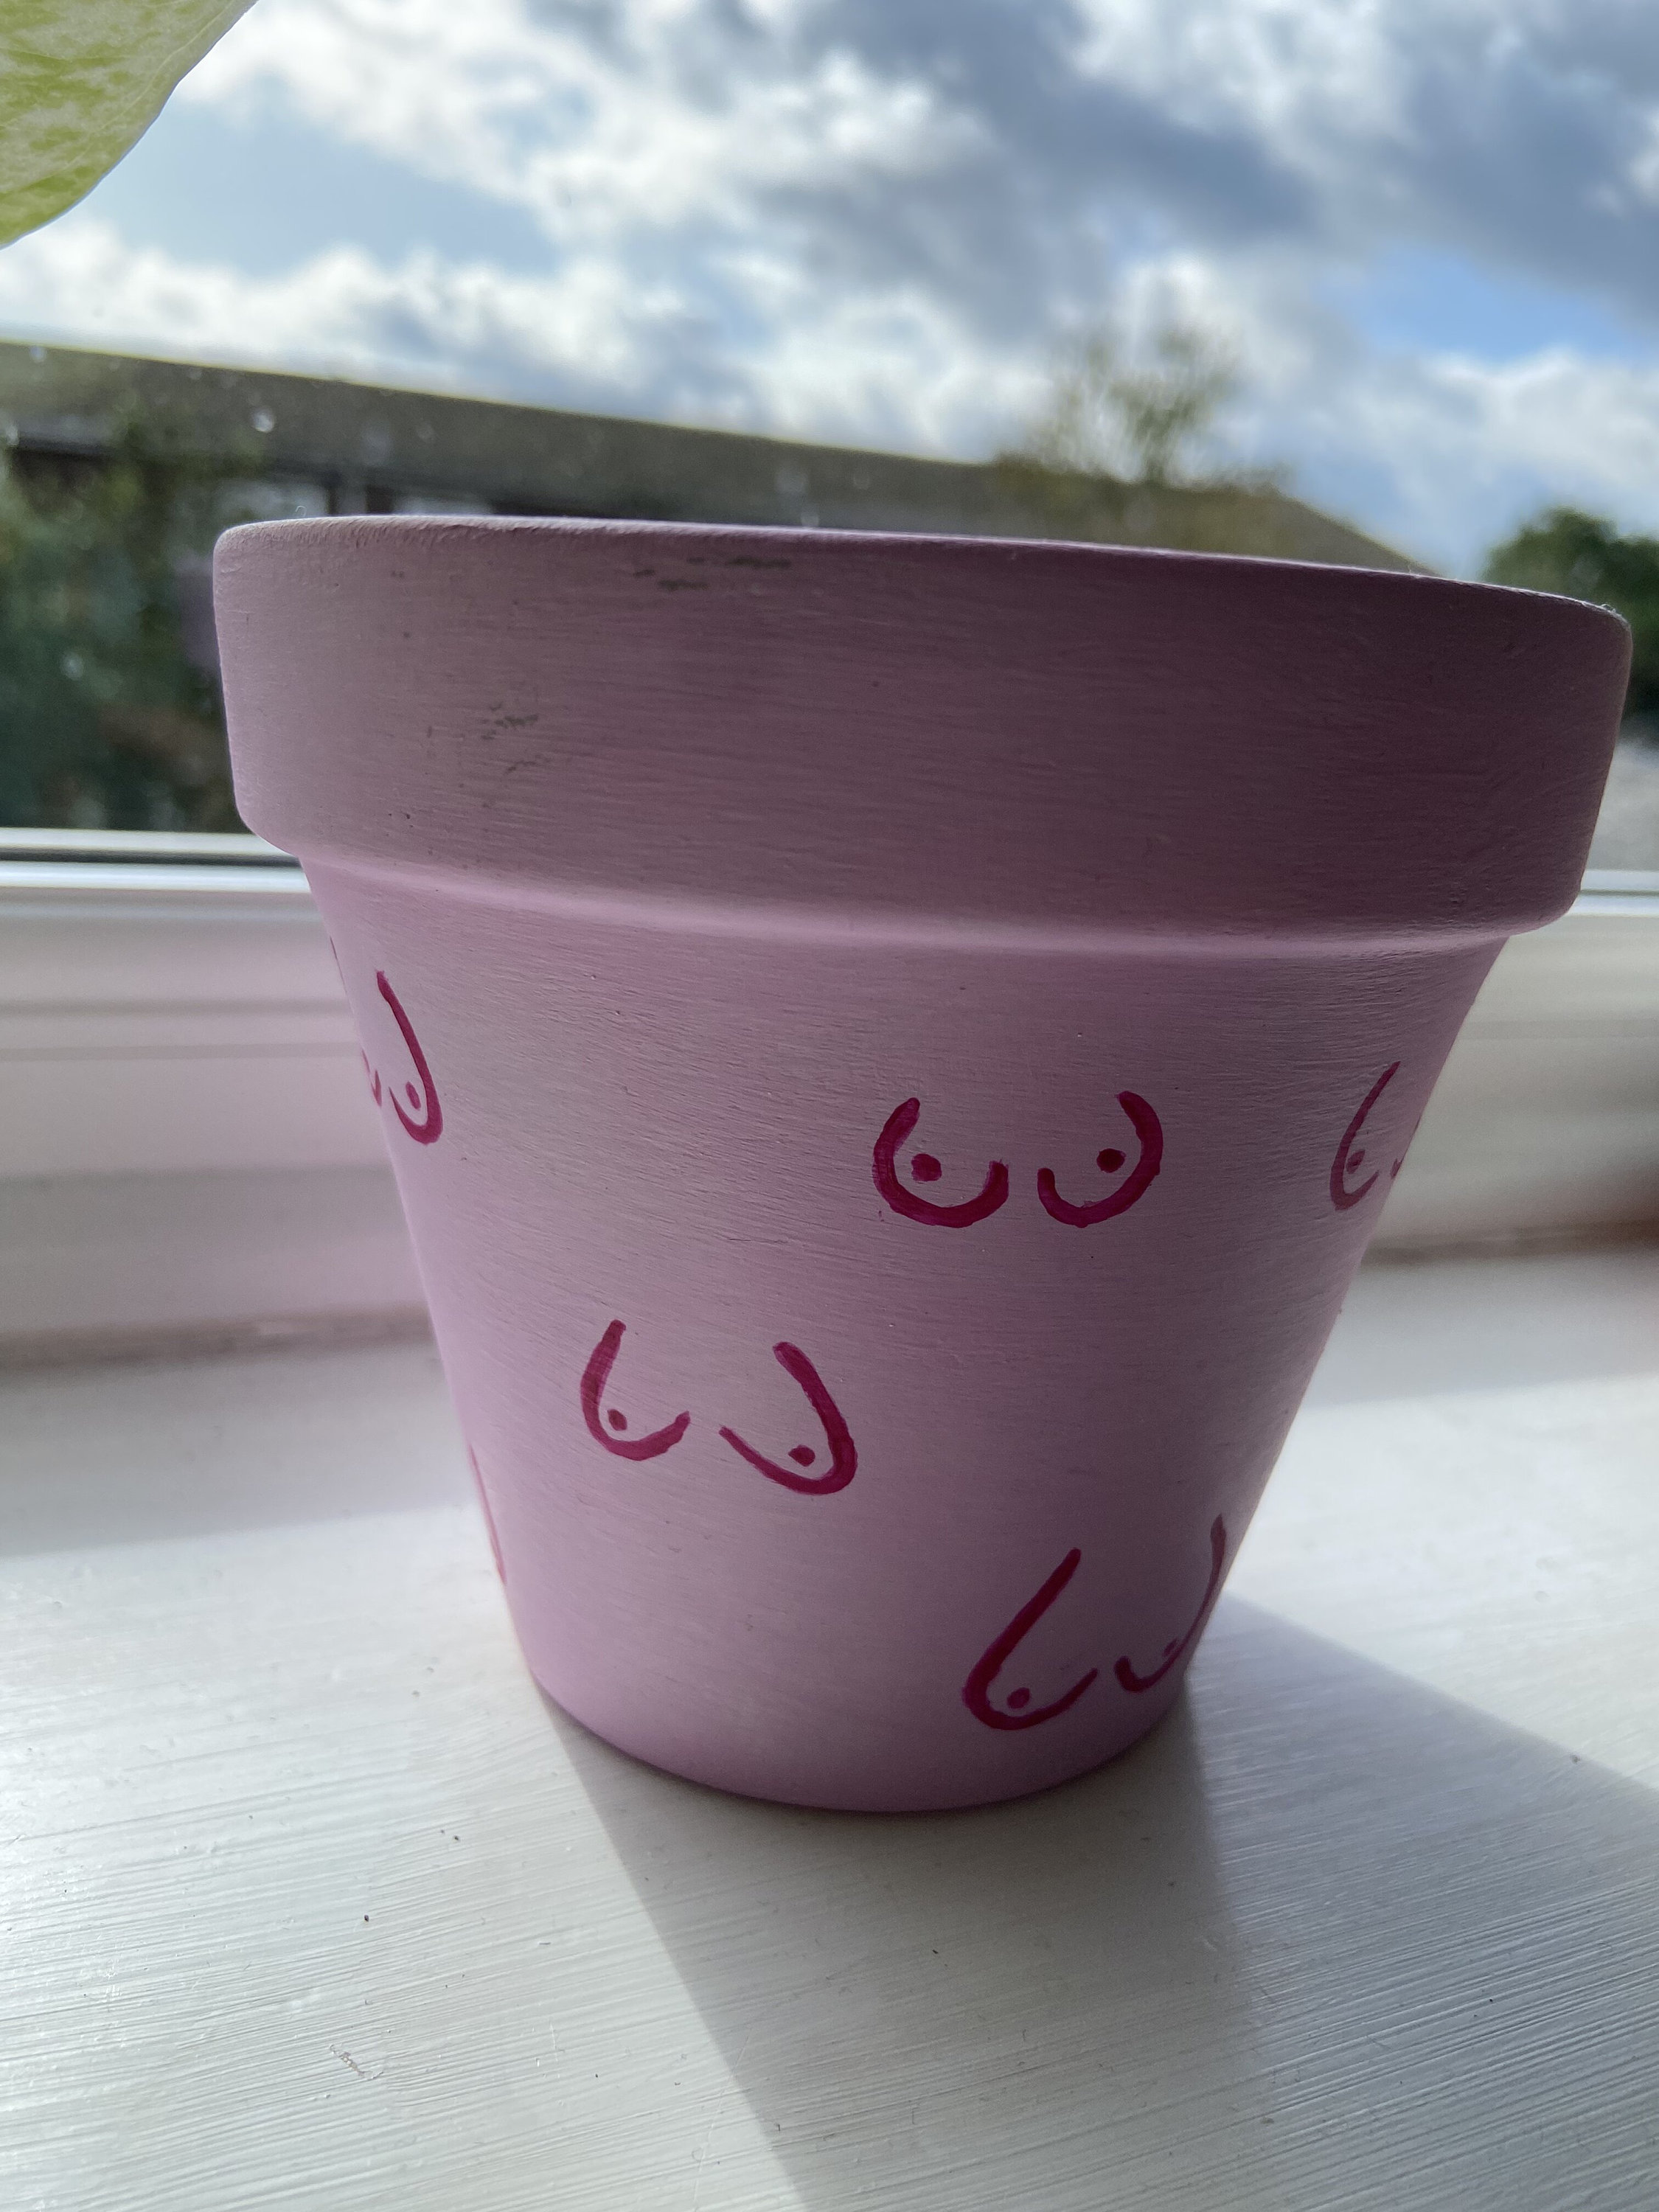 PERSONALISED BOOB POTS AVAILABLE! Look at the - Depop